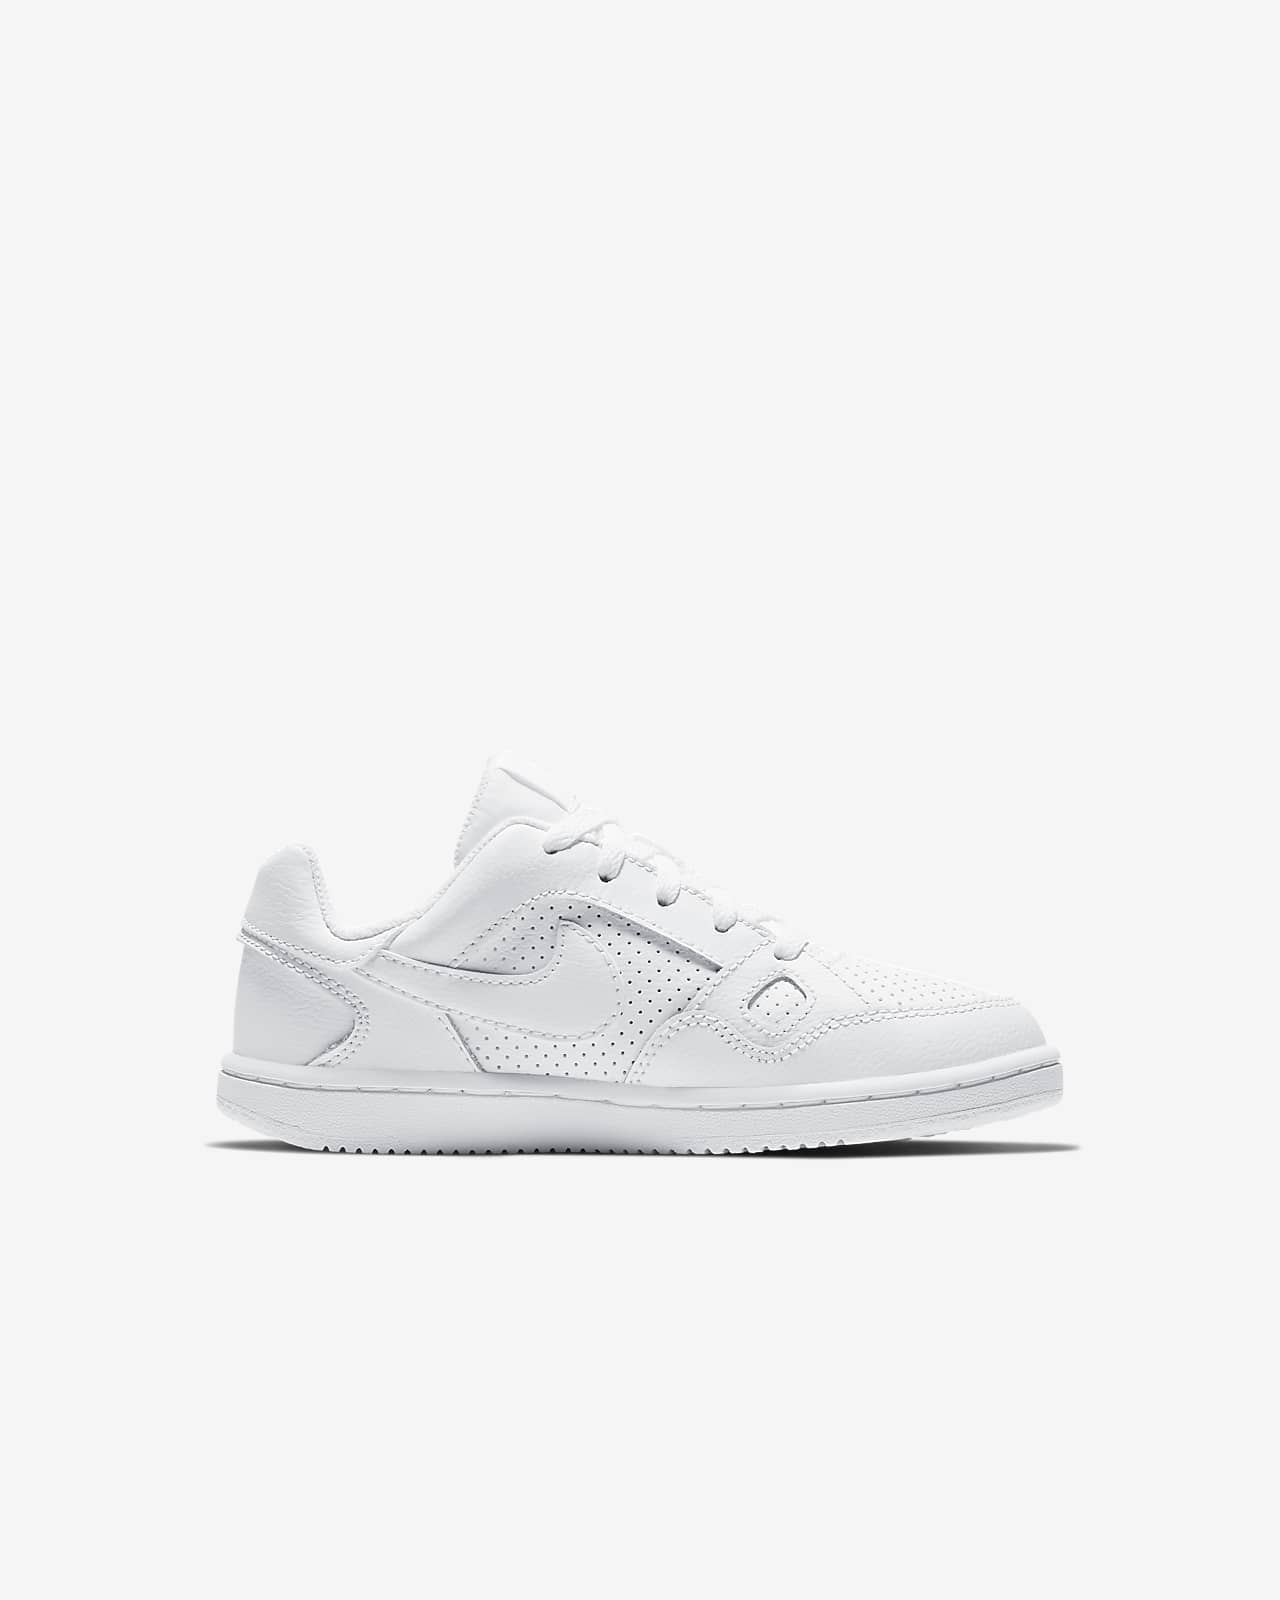 nike son of force low white